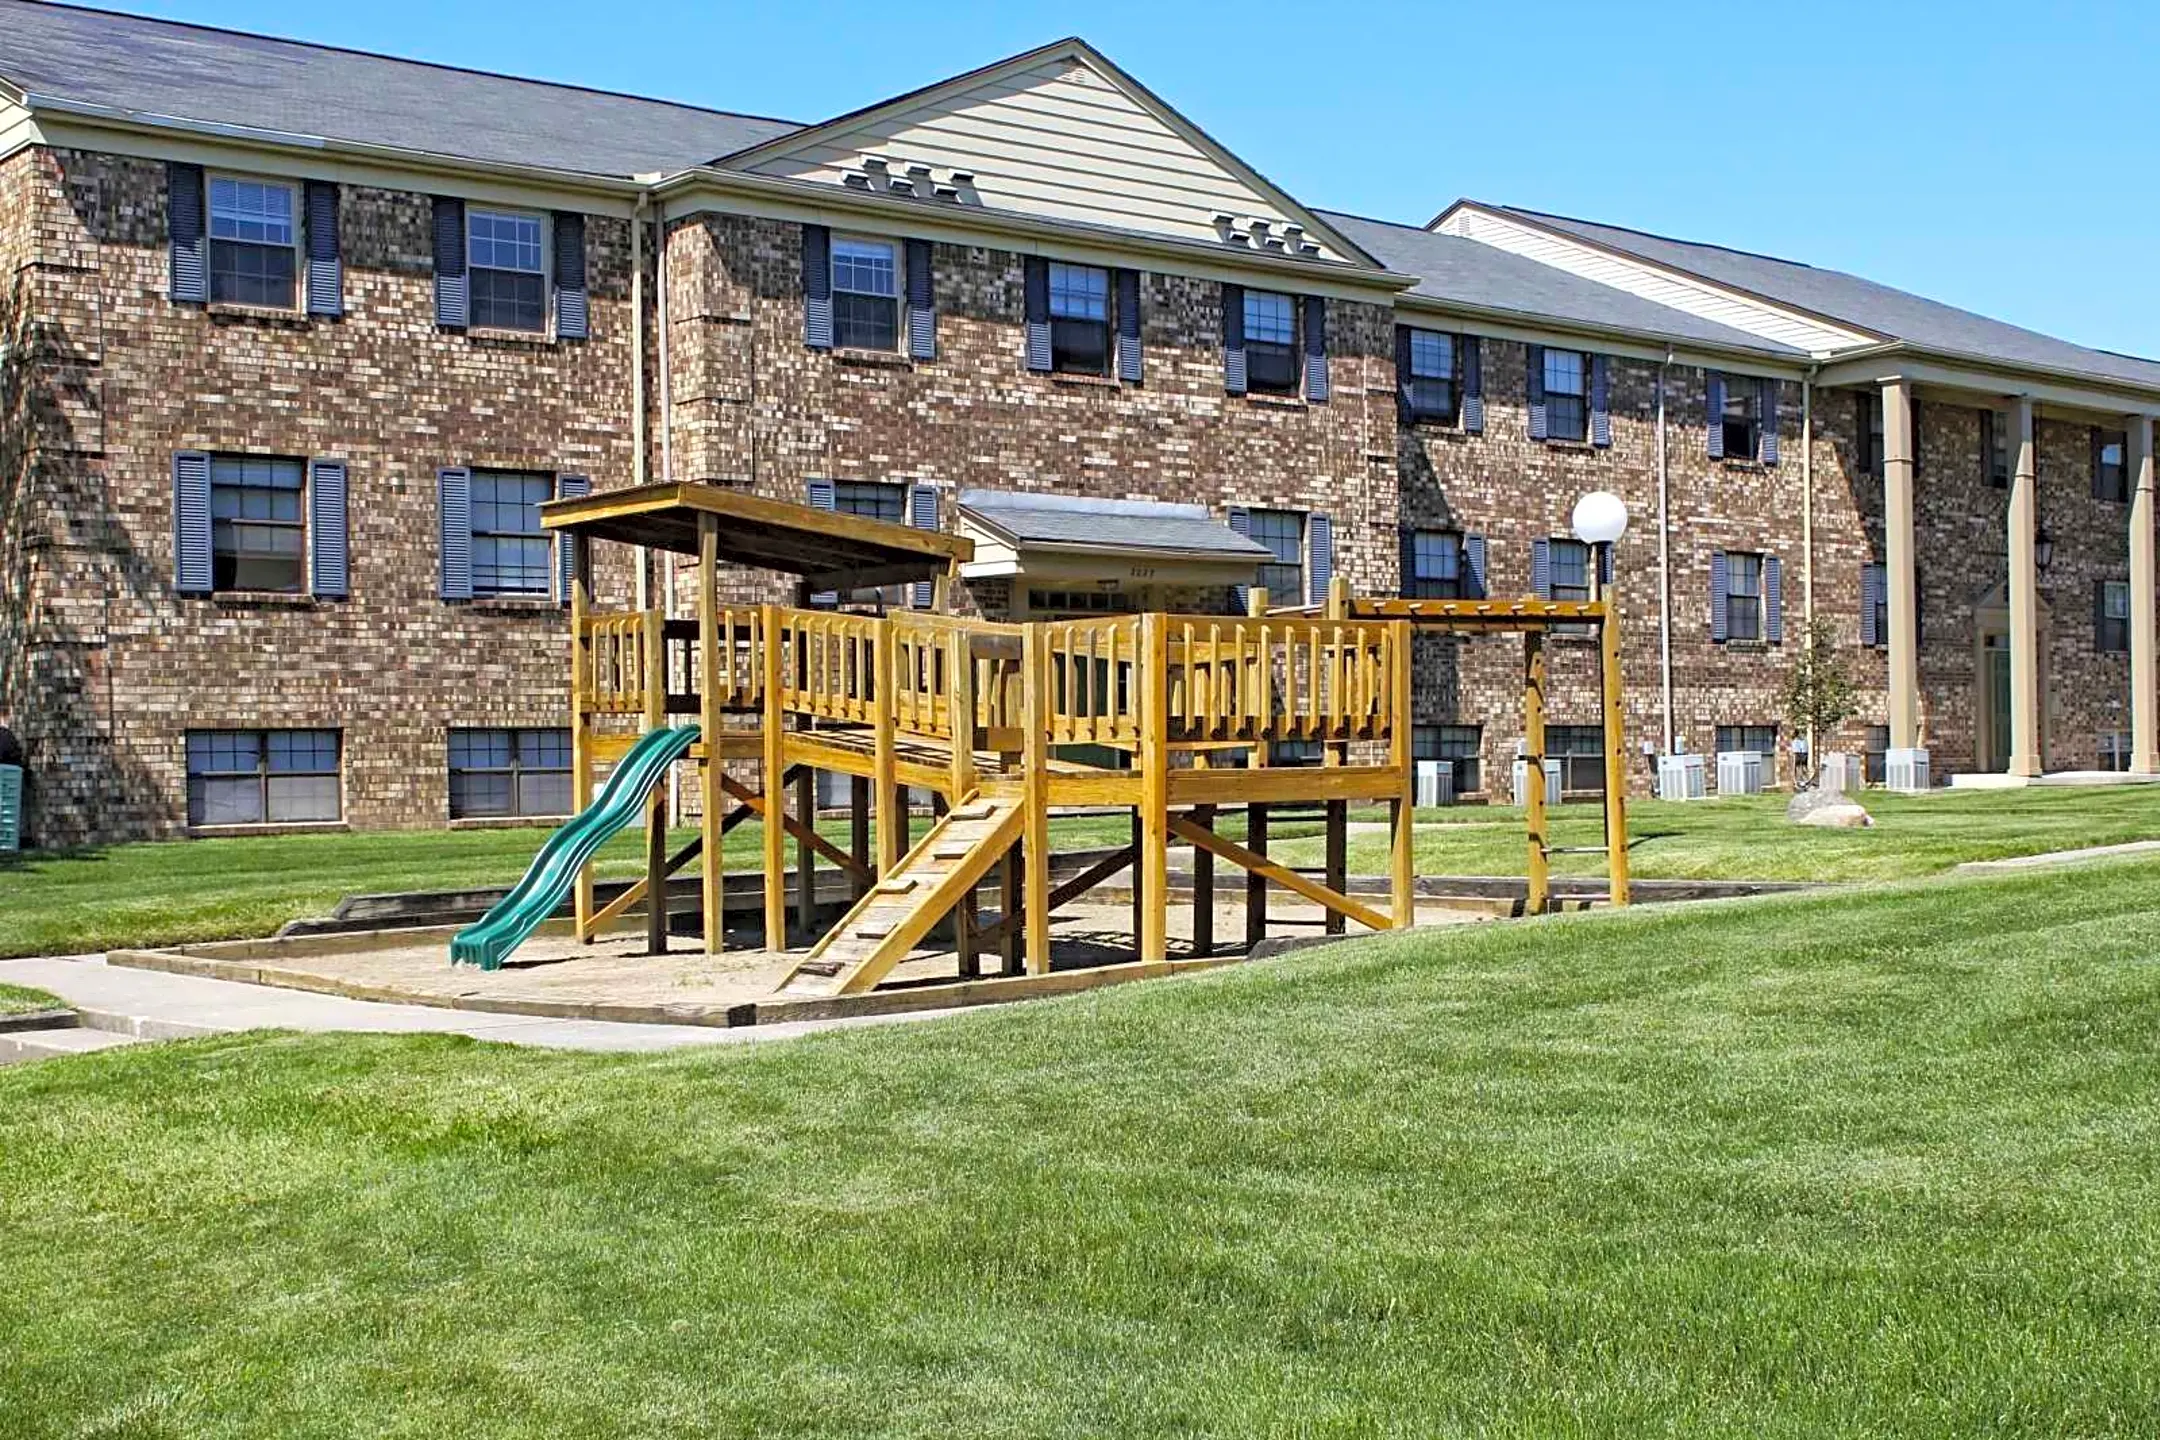 Playground - Lake View Shores - Maumee, OH